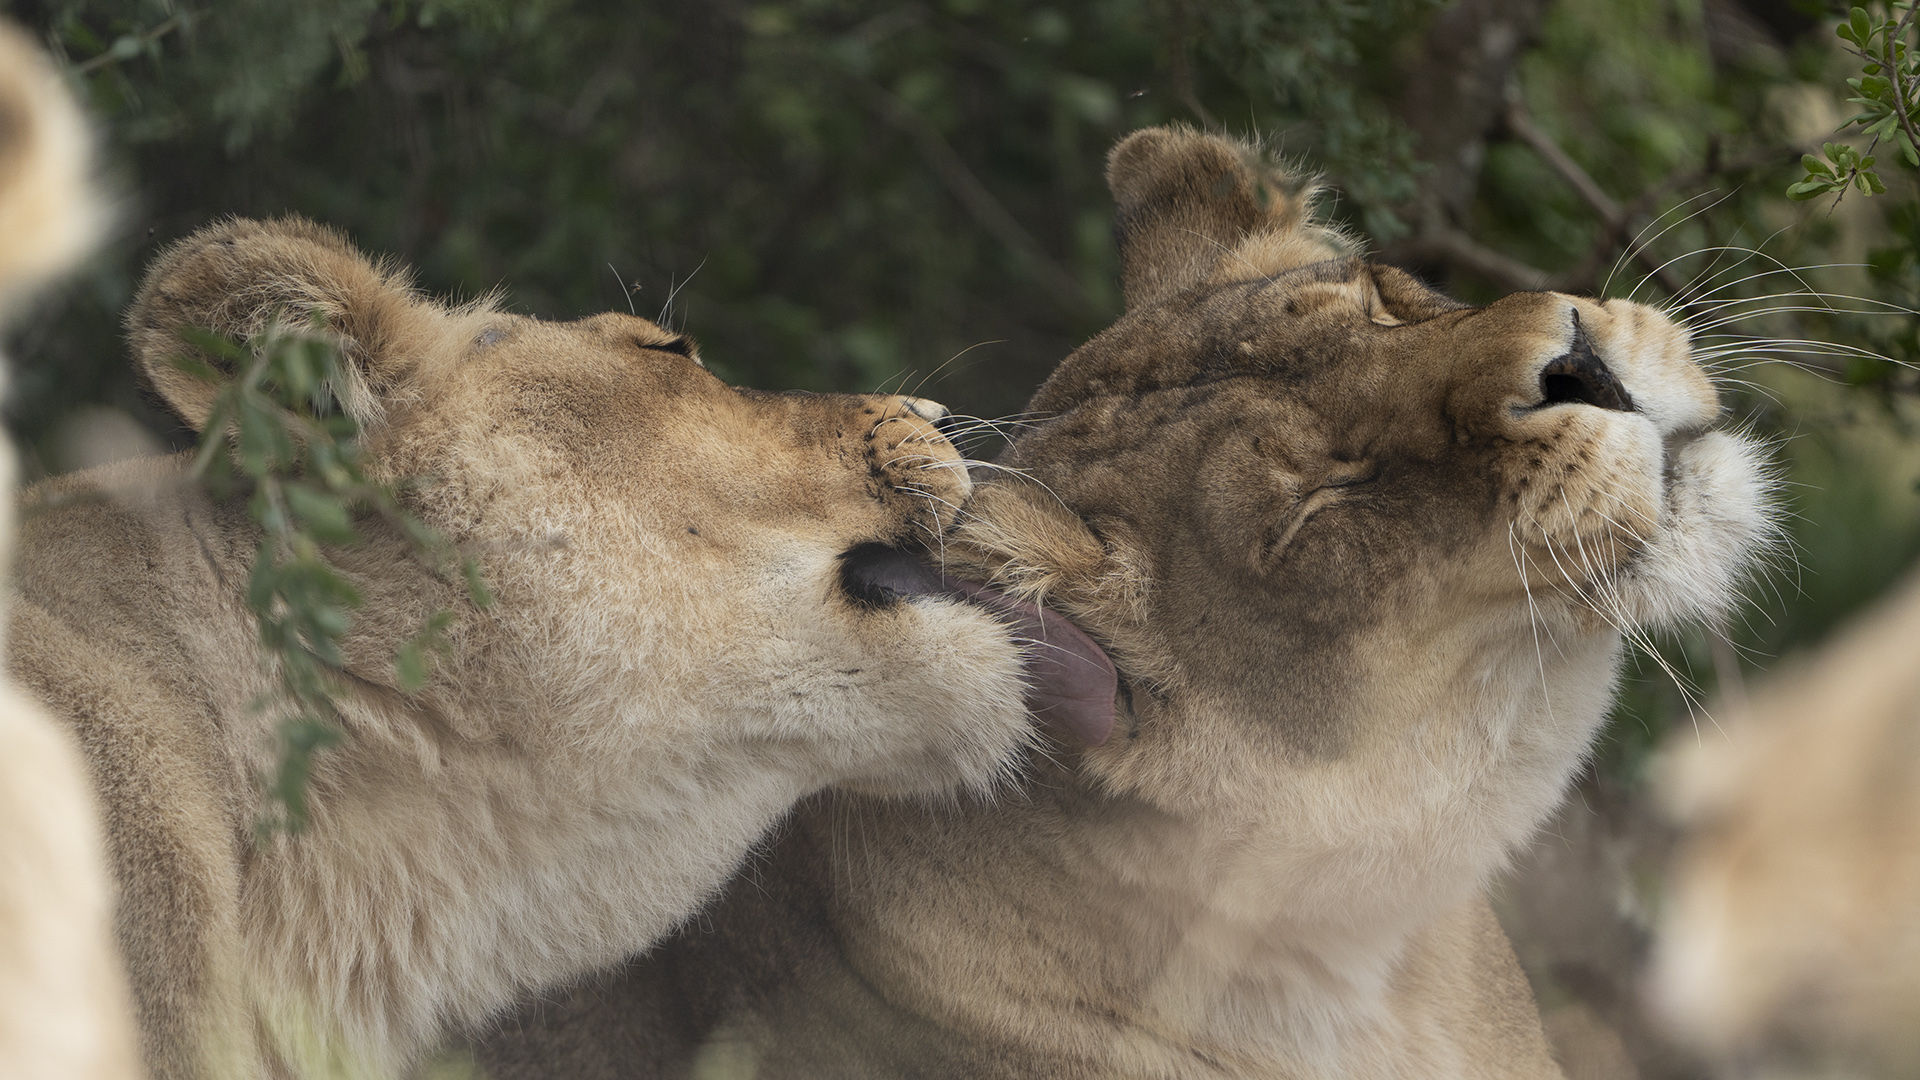 A female lion licking the face of another lion